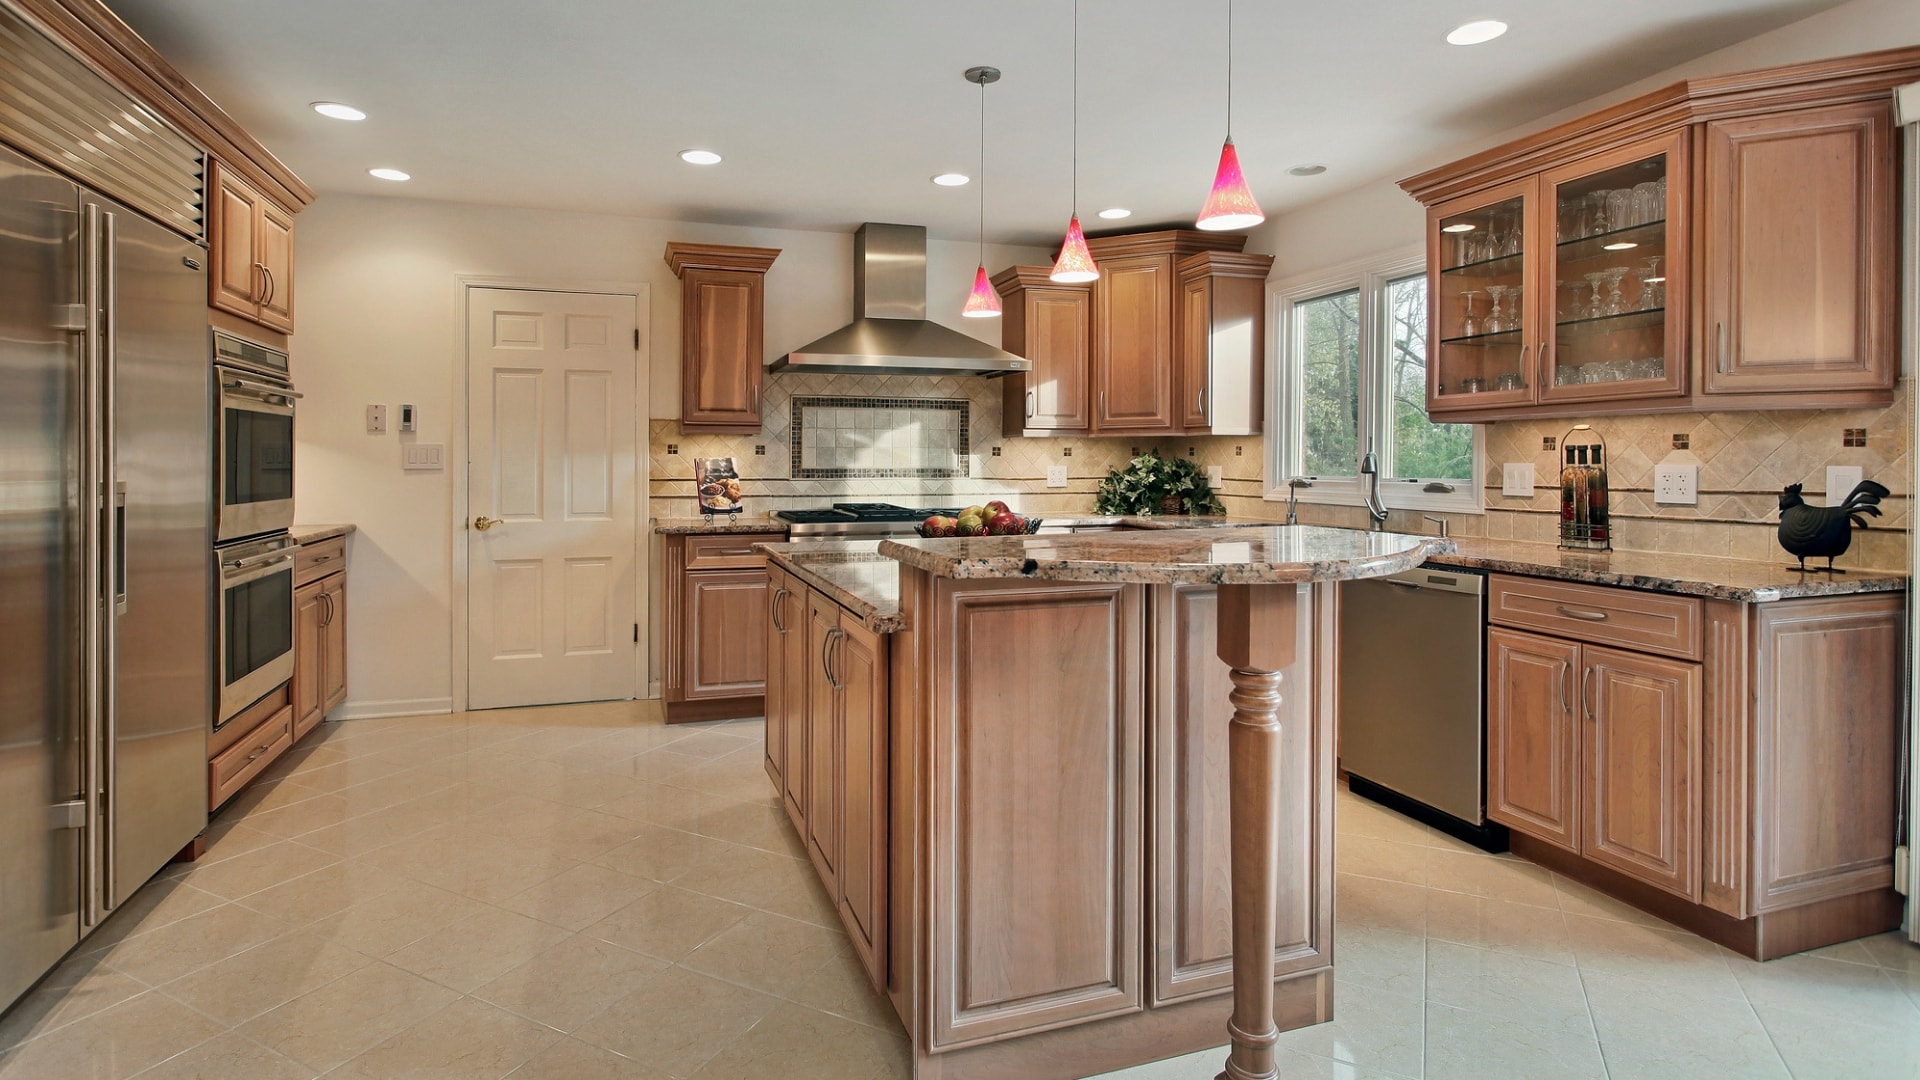 Kitchen Remodeling Costs in Washington D.C.